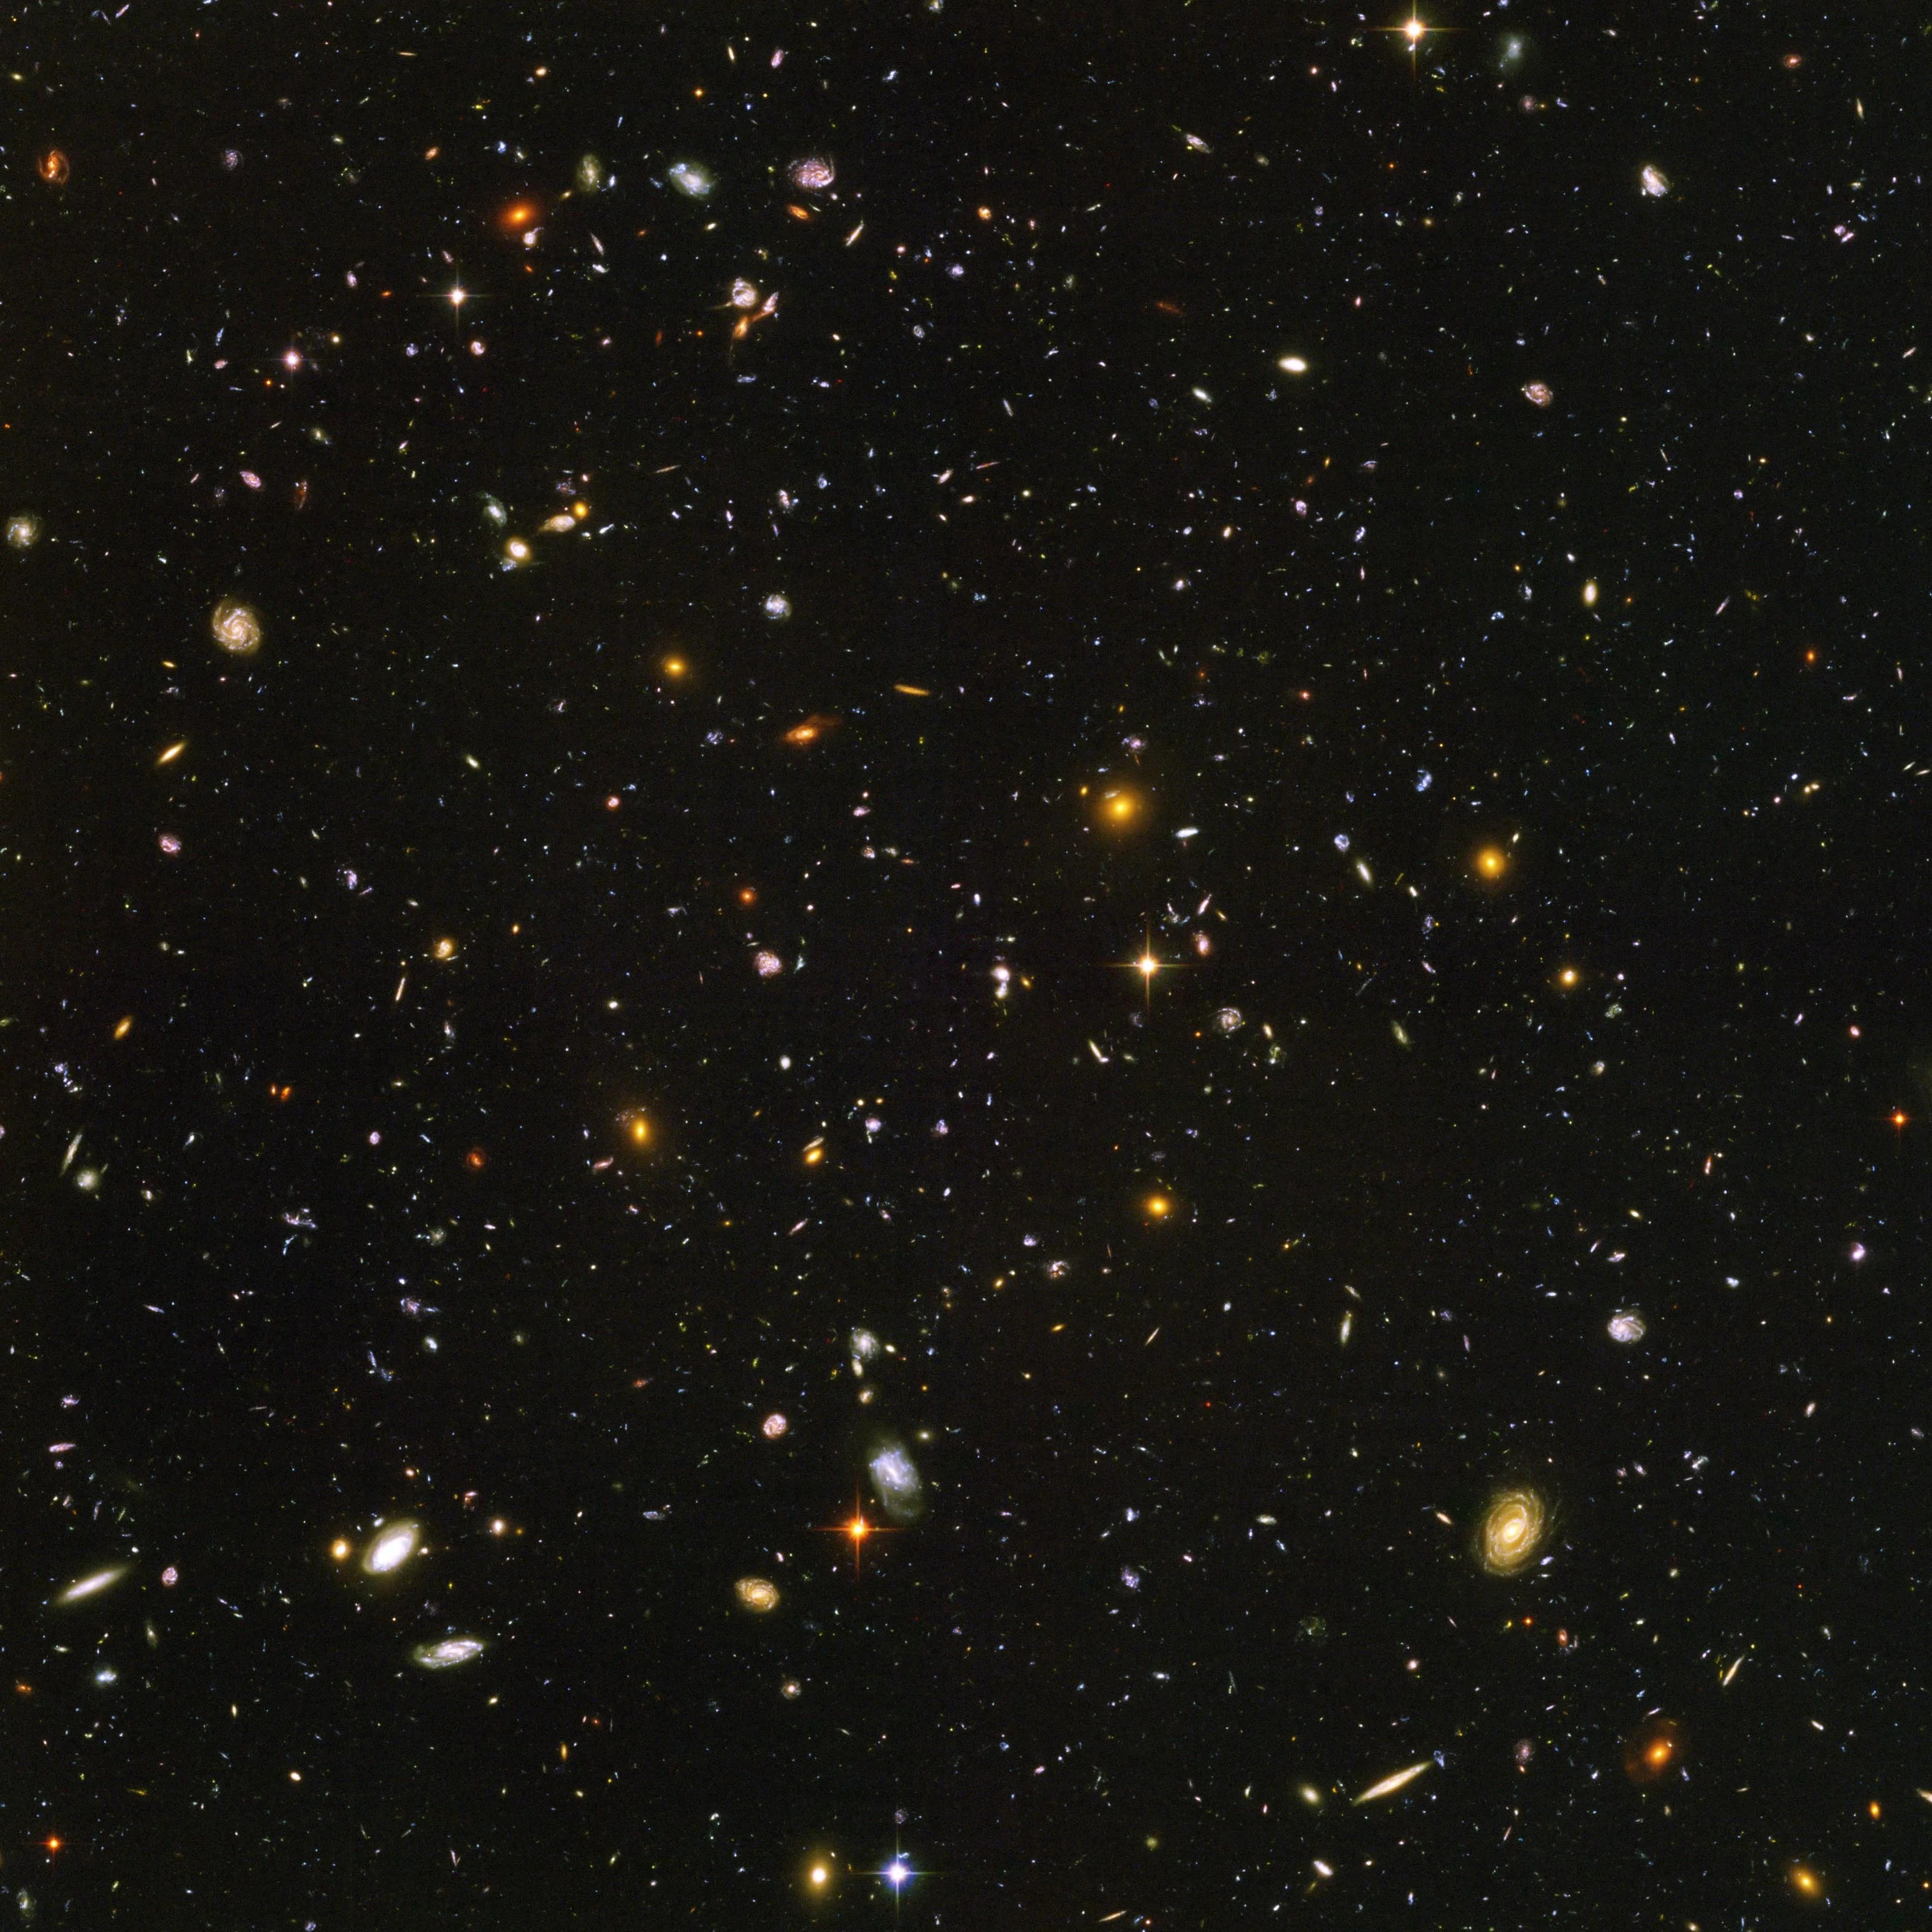 a myriad of colorful galaxies, in all shapes, sizes, and forms, dot the image